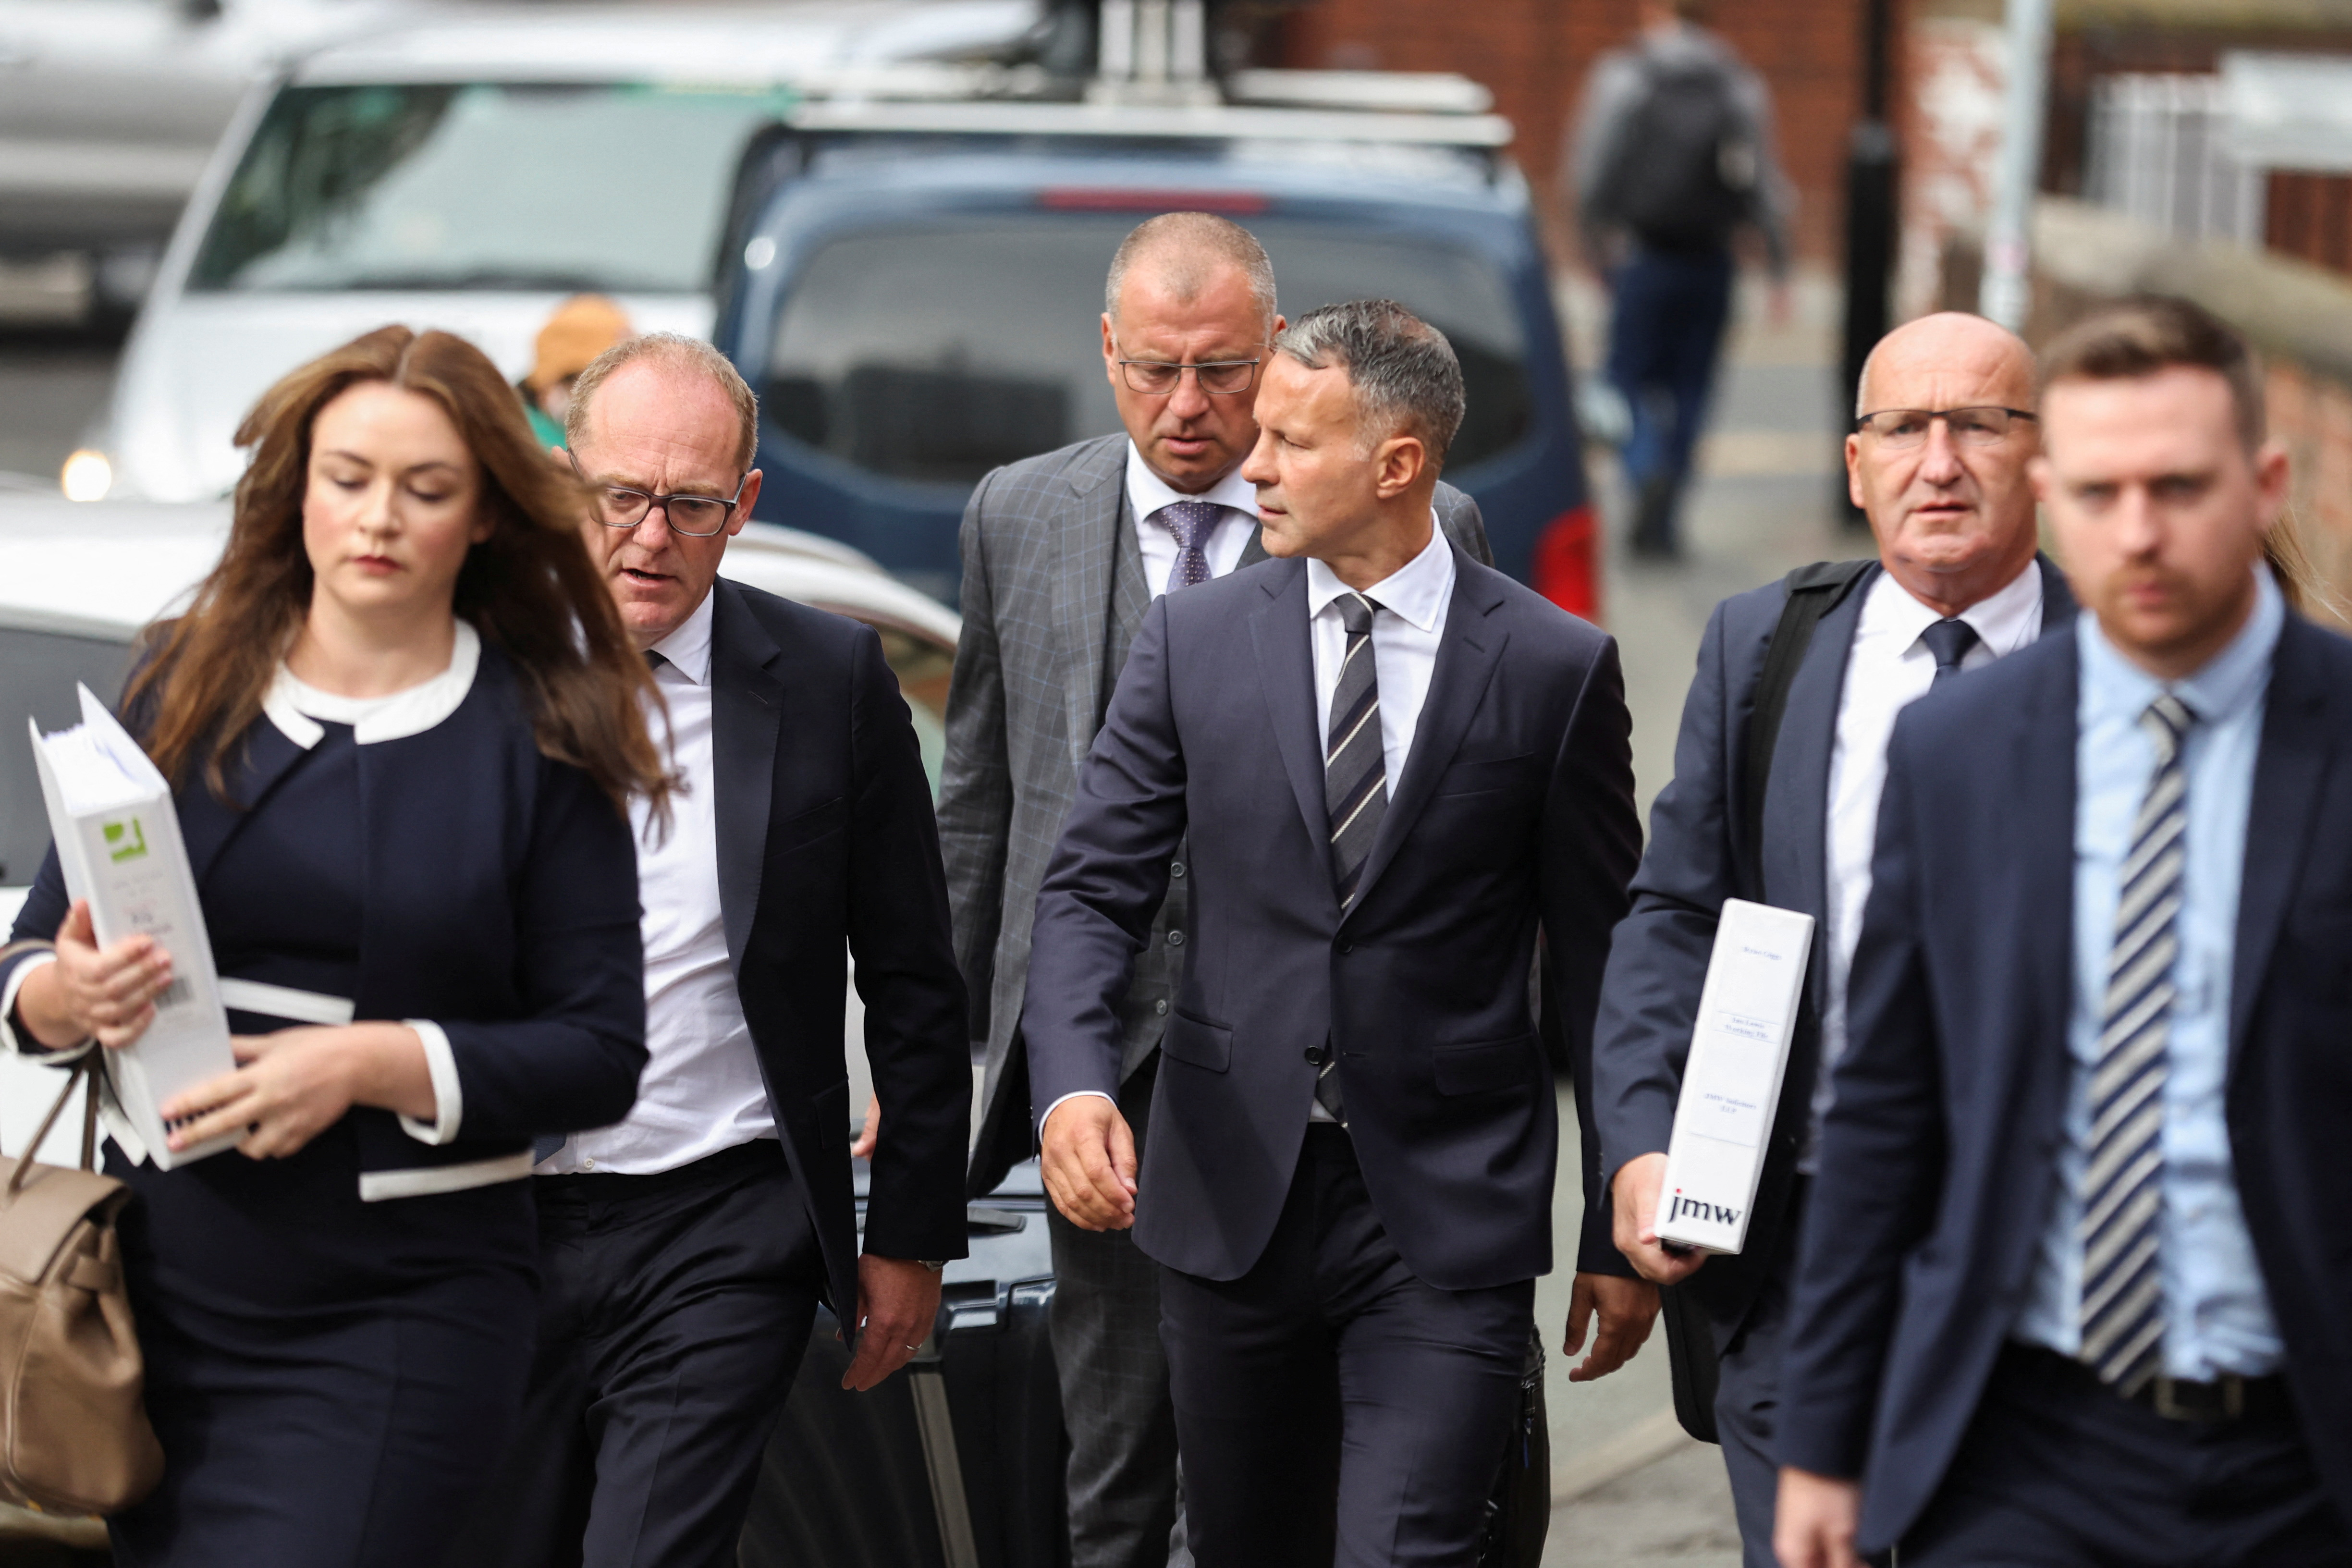 Former Manchester United footballer Giggs arrives at court in Manchester